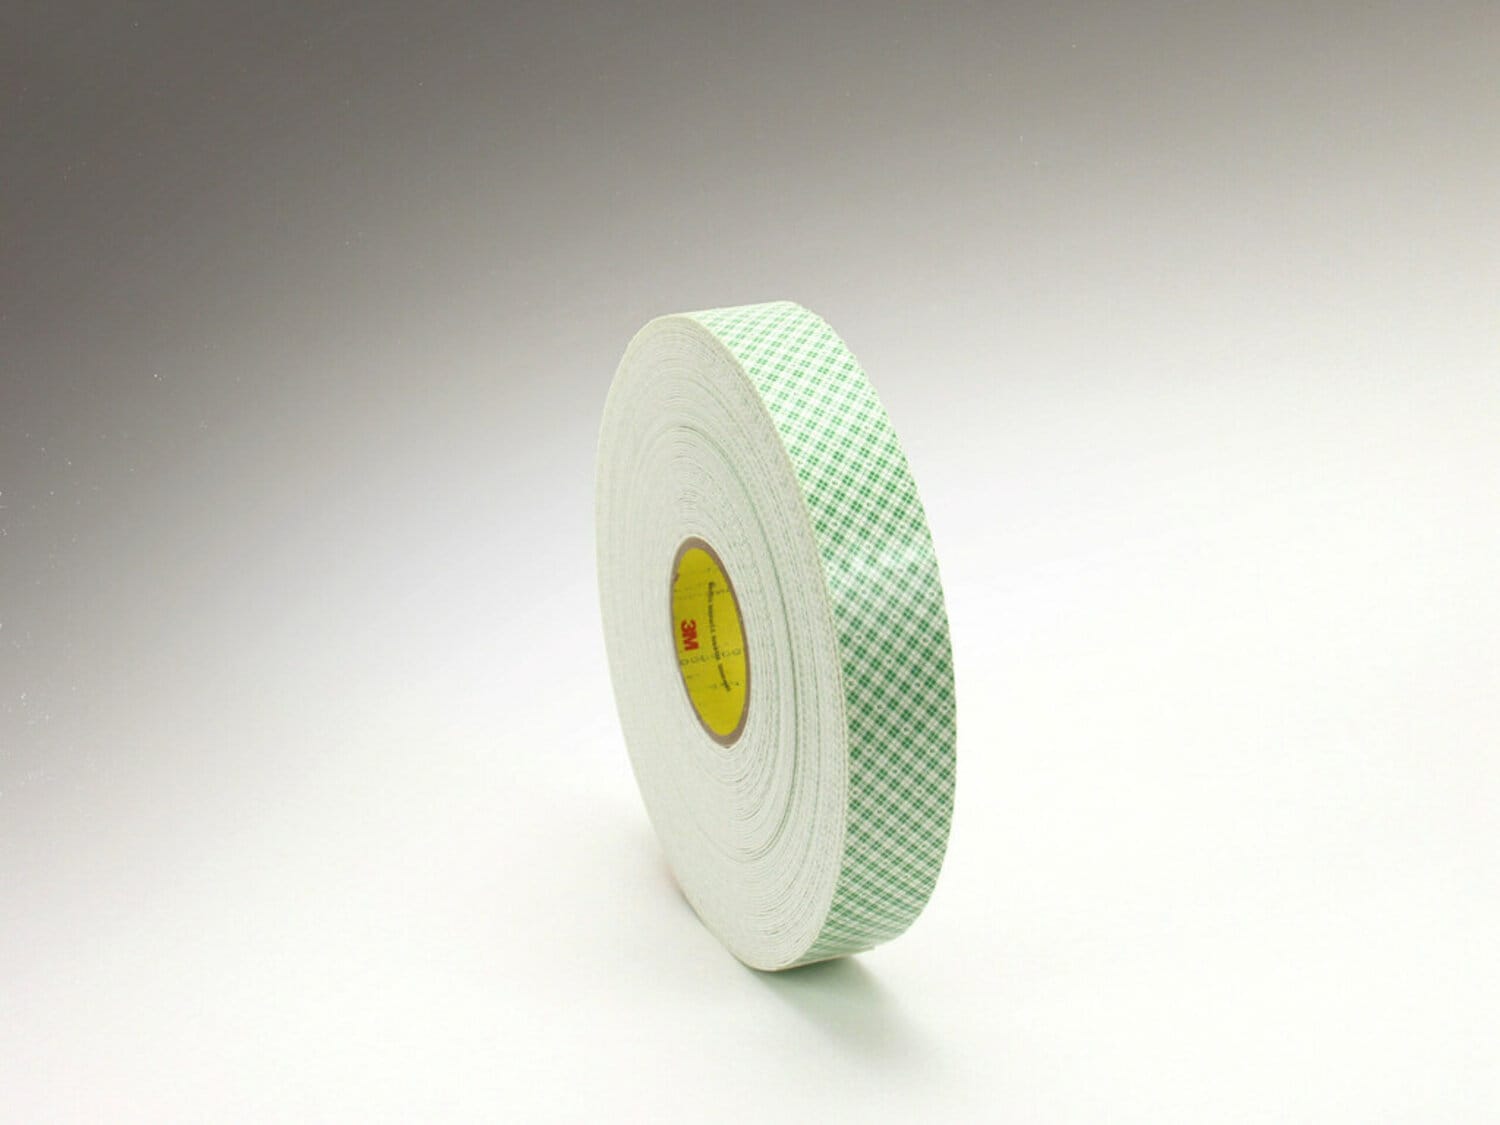 7000122485 - 3M Double Coated Urethane Foam Tape 4016, Off White, 3/8 in x 36 yd, 62
mil, 24 rolls per case